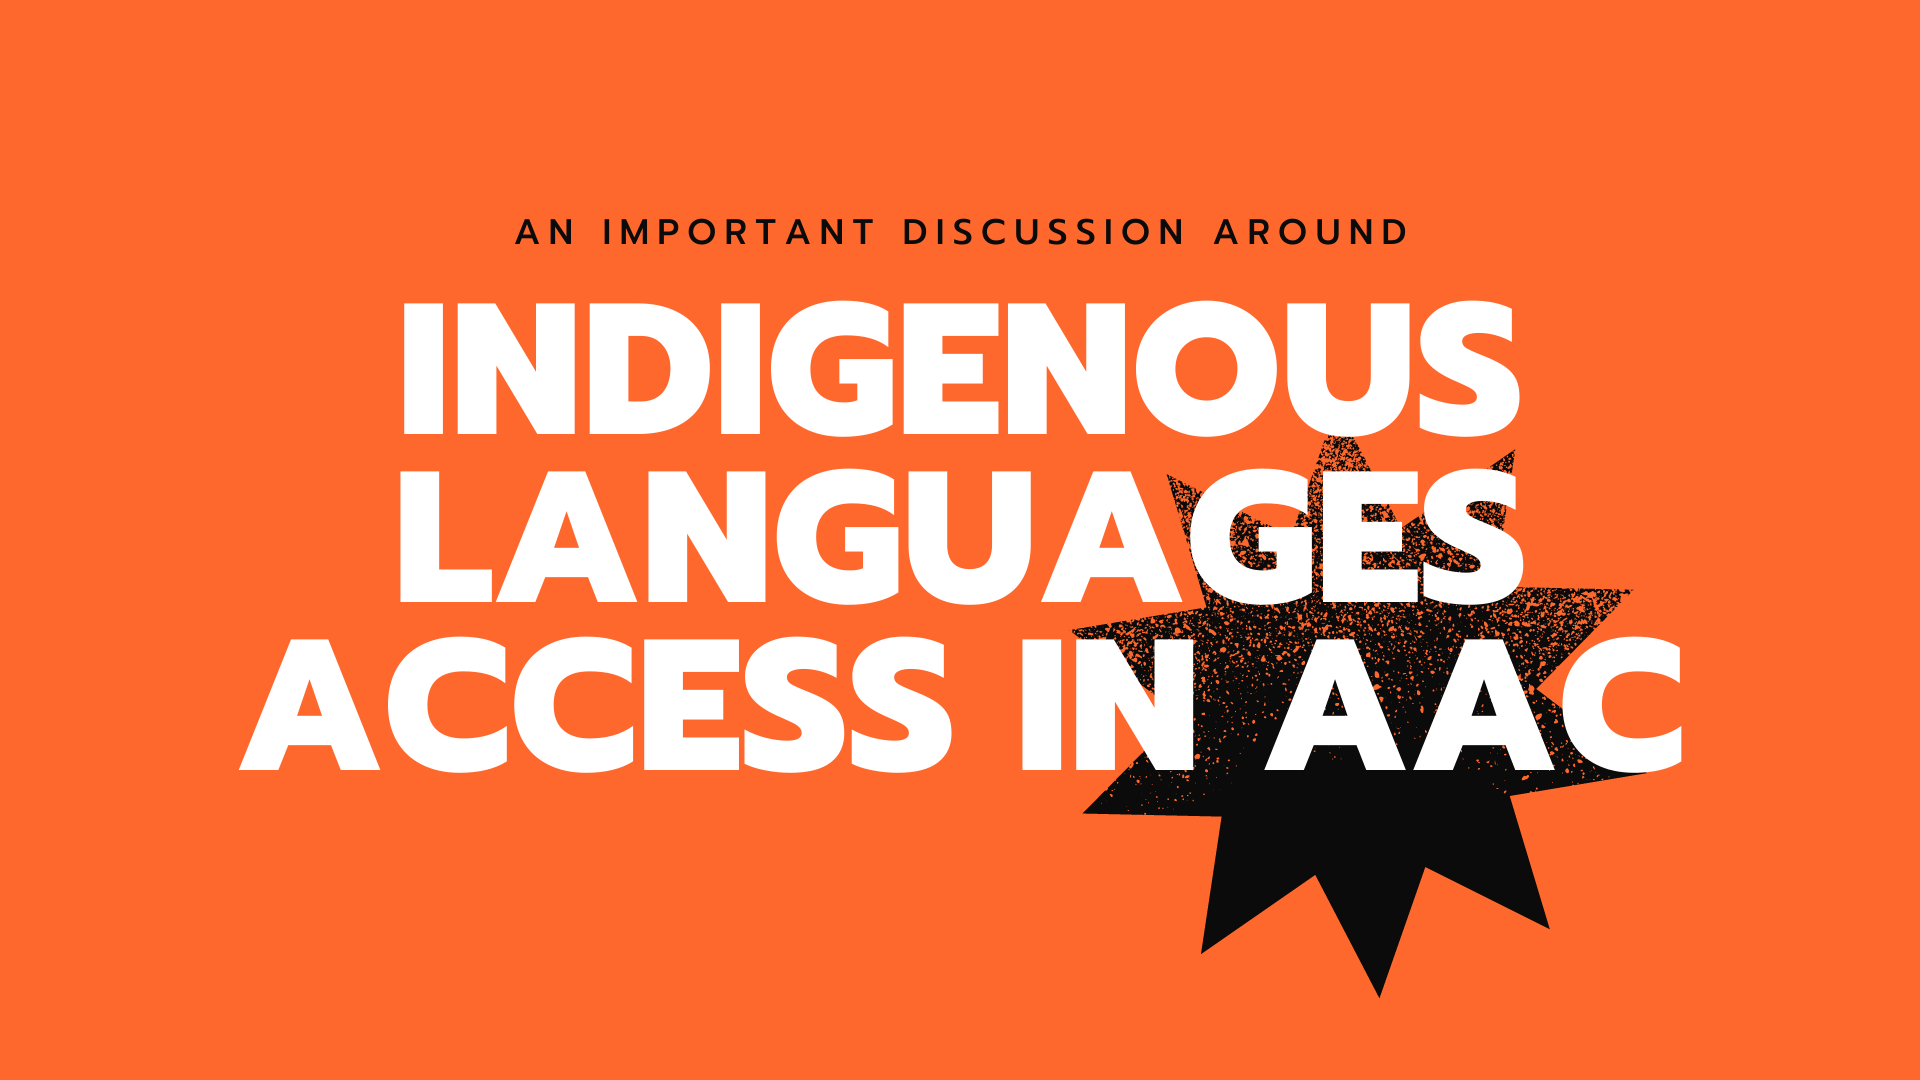 Orange Background with text: An Important Discussion around Indigenous Languages Access in AAC